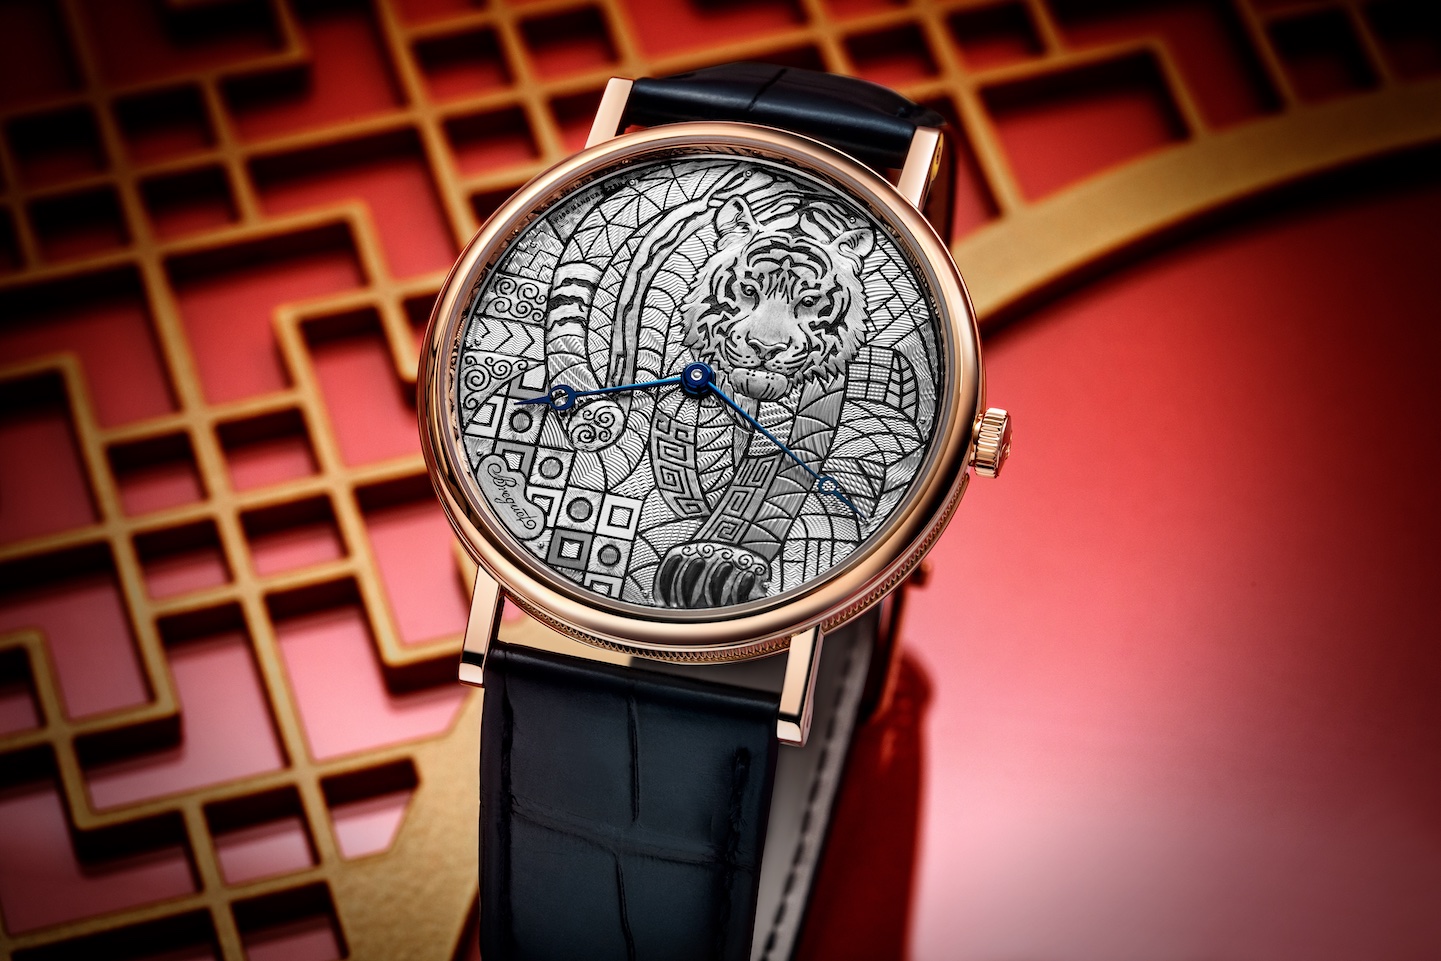 Breguet 7145 Classique year of the tiger